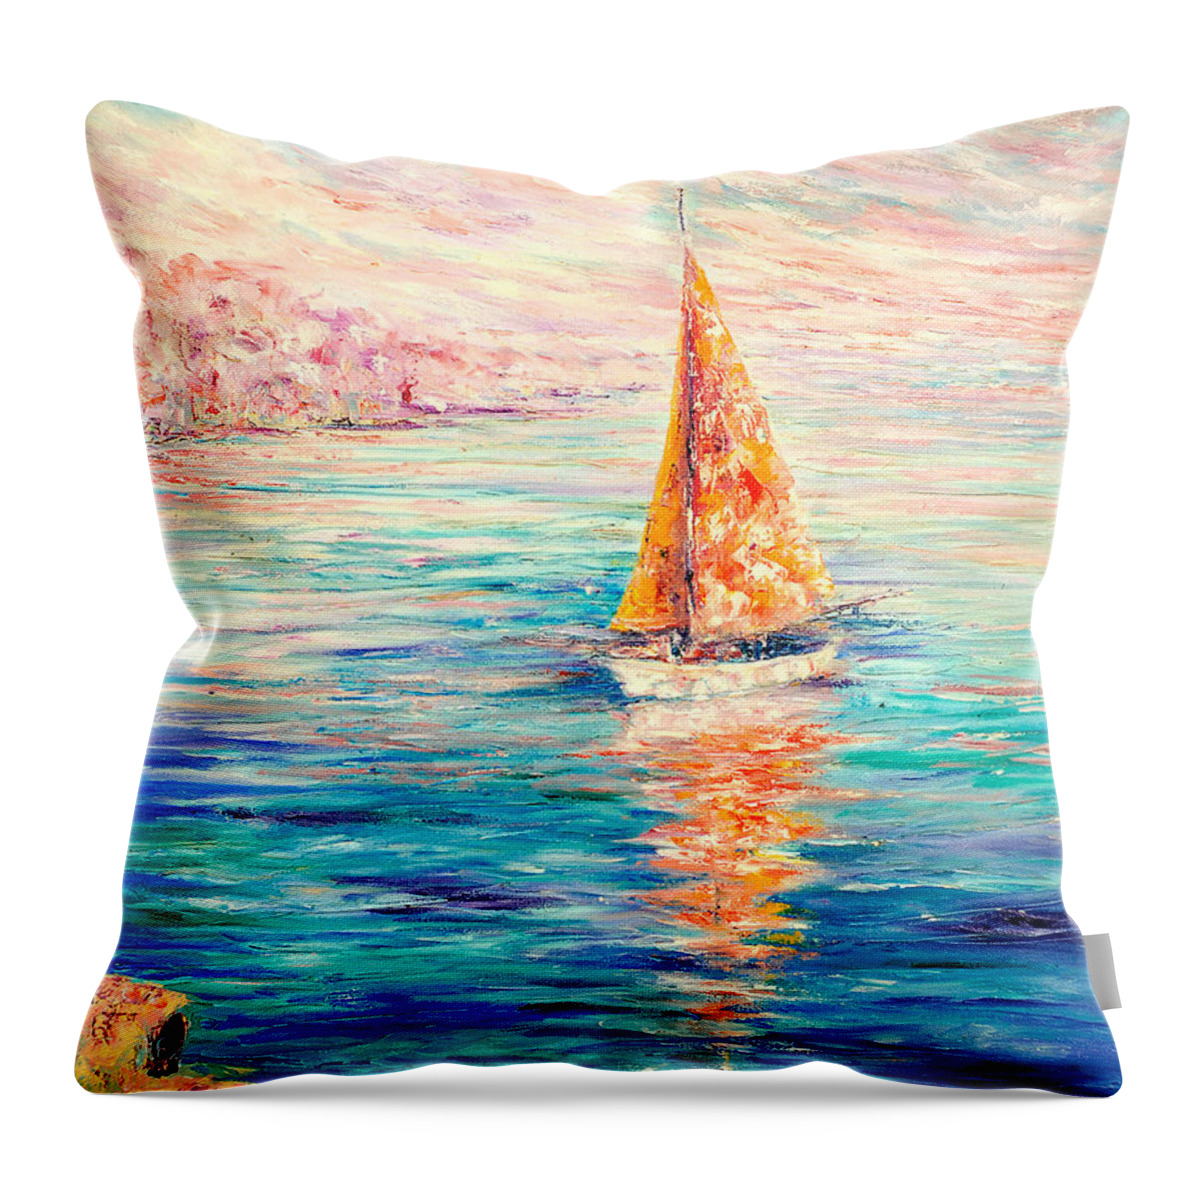 Contemporary Impressionism Throw Pillow featuring the painting Good Morning Beautiful by Helen Kagan